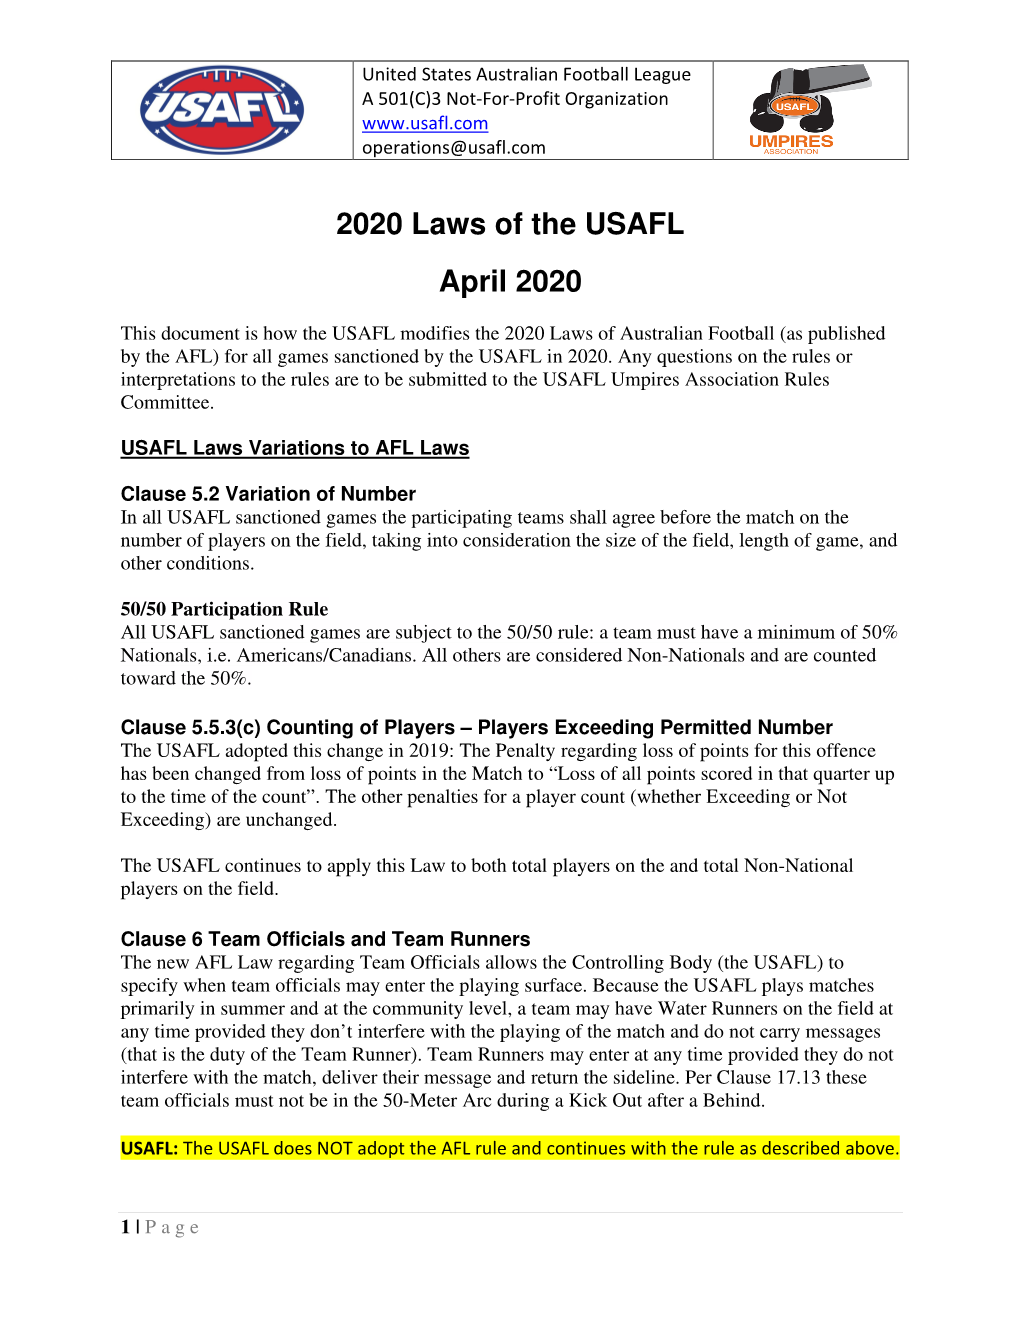 2020 Laws of the USAFL April 2020